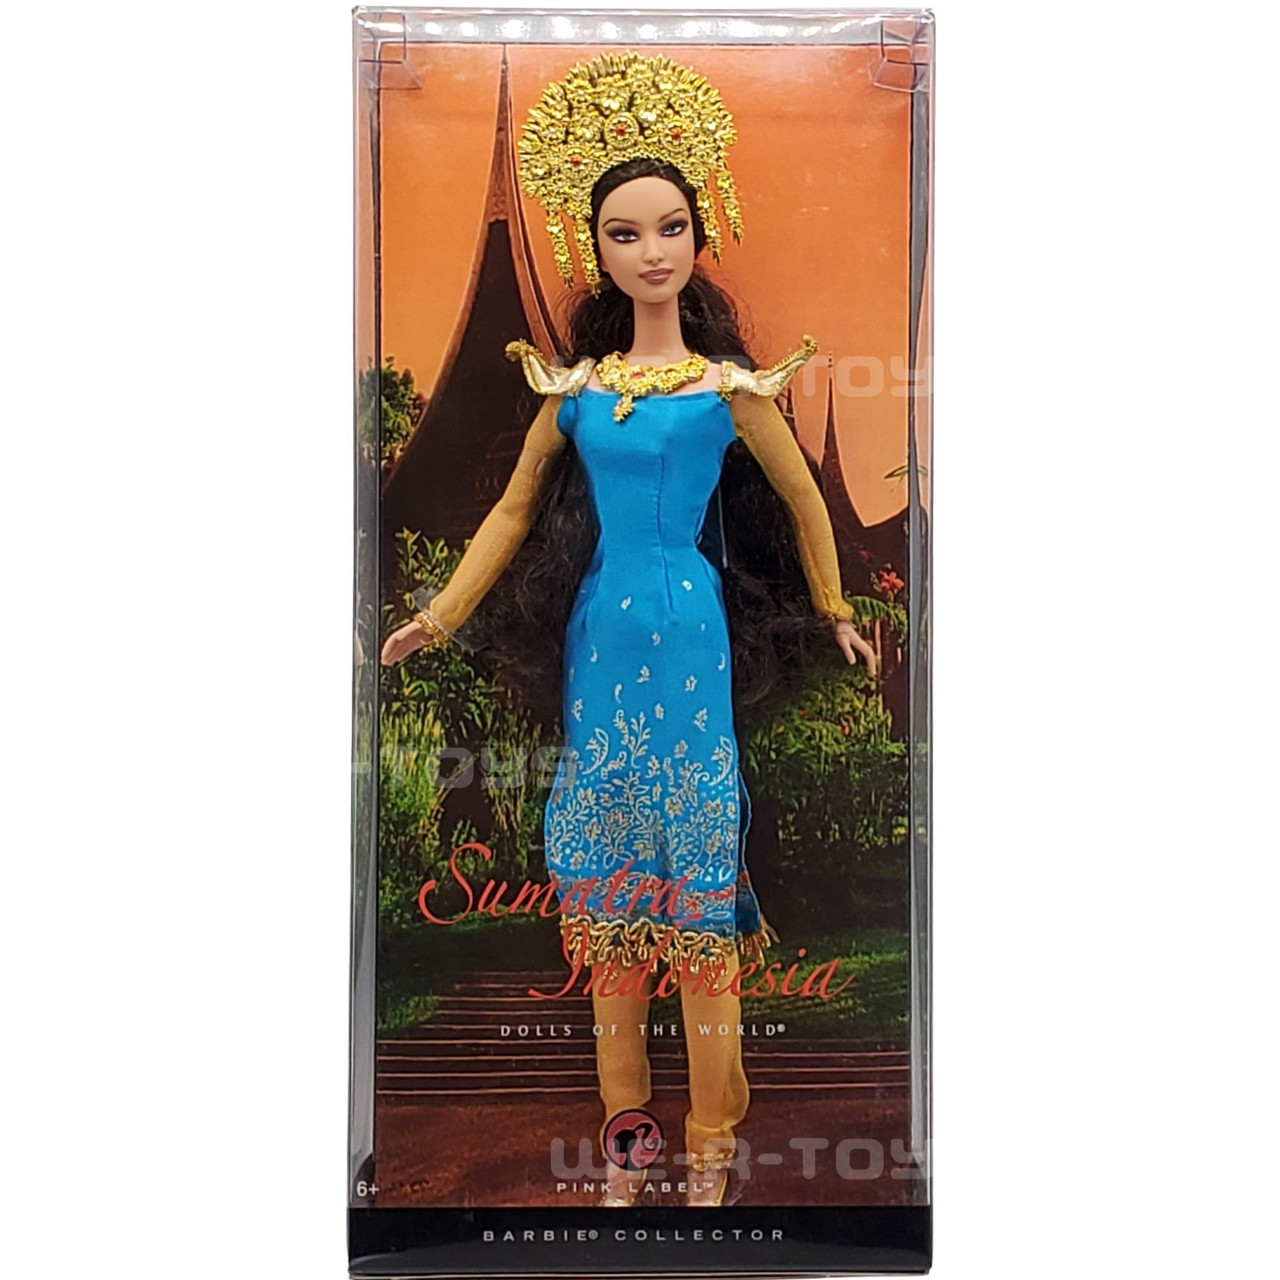 Sumatra Indonesia Barbie Doll Dolls of the World Asia Pink Label 